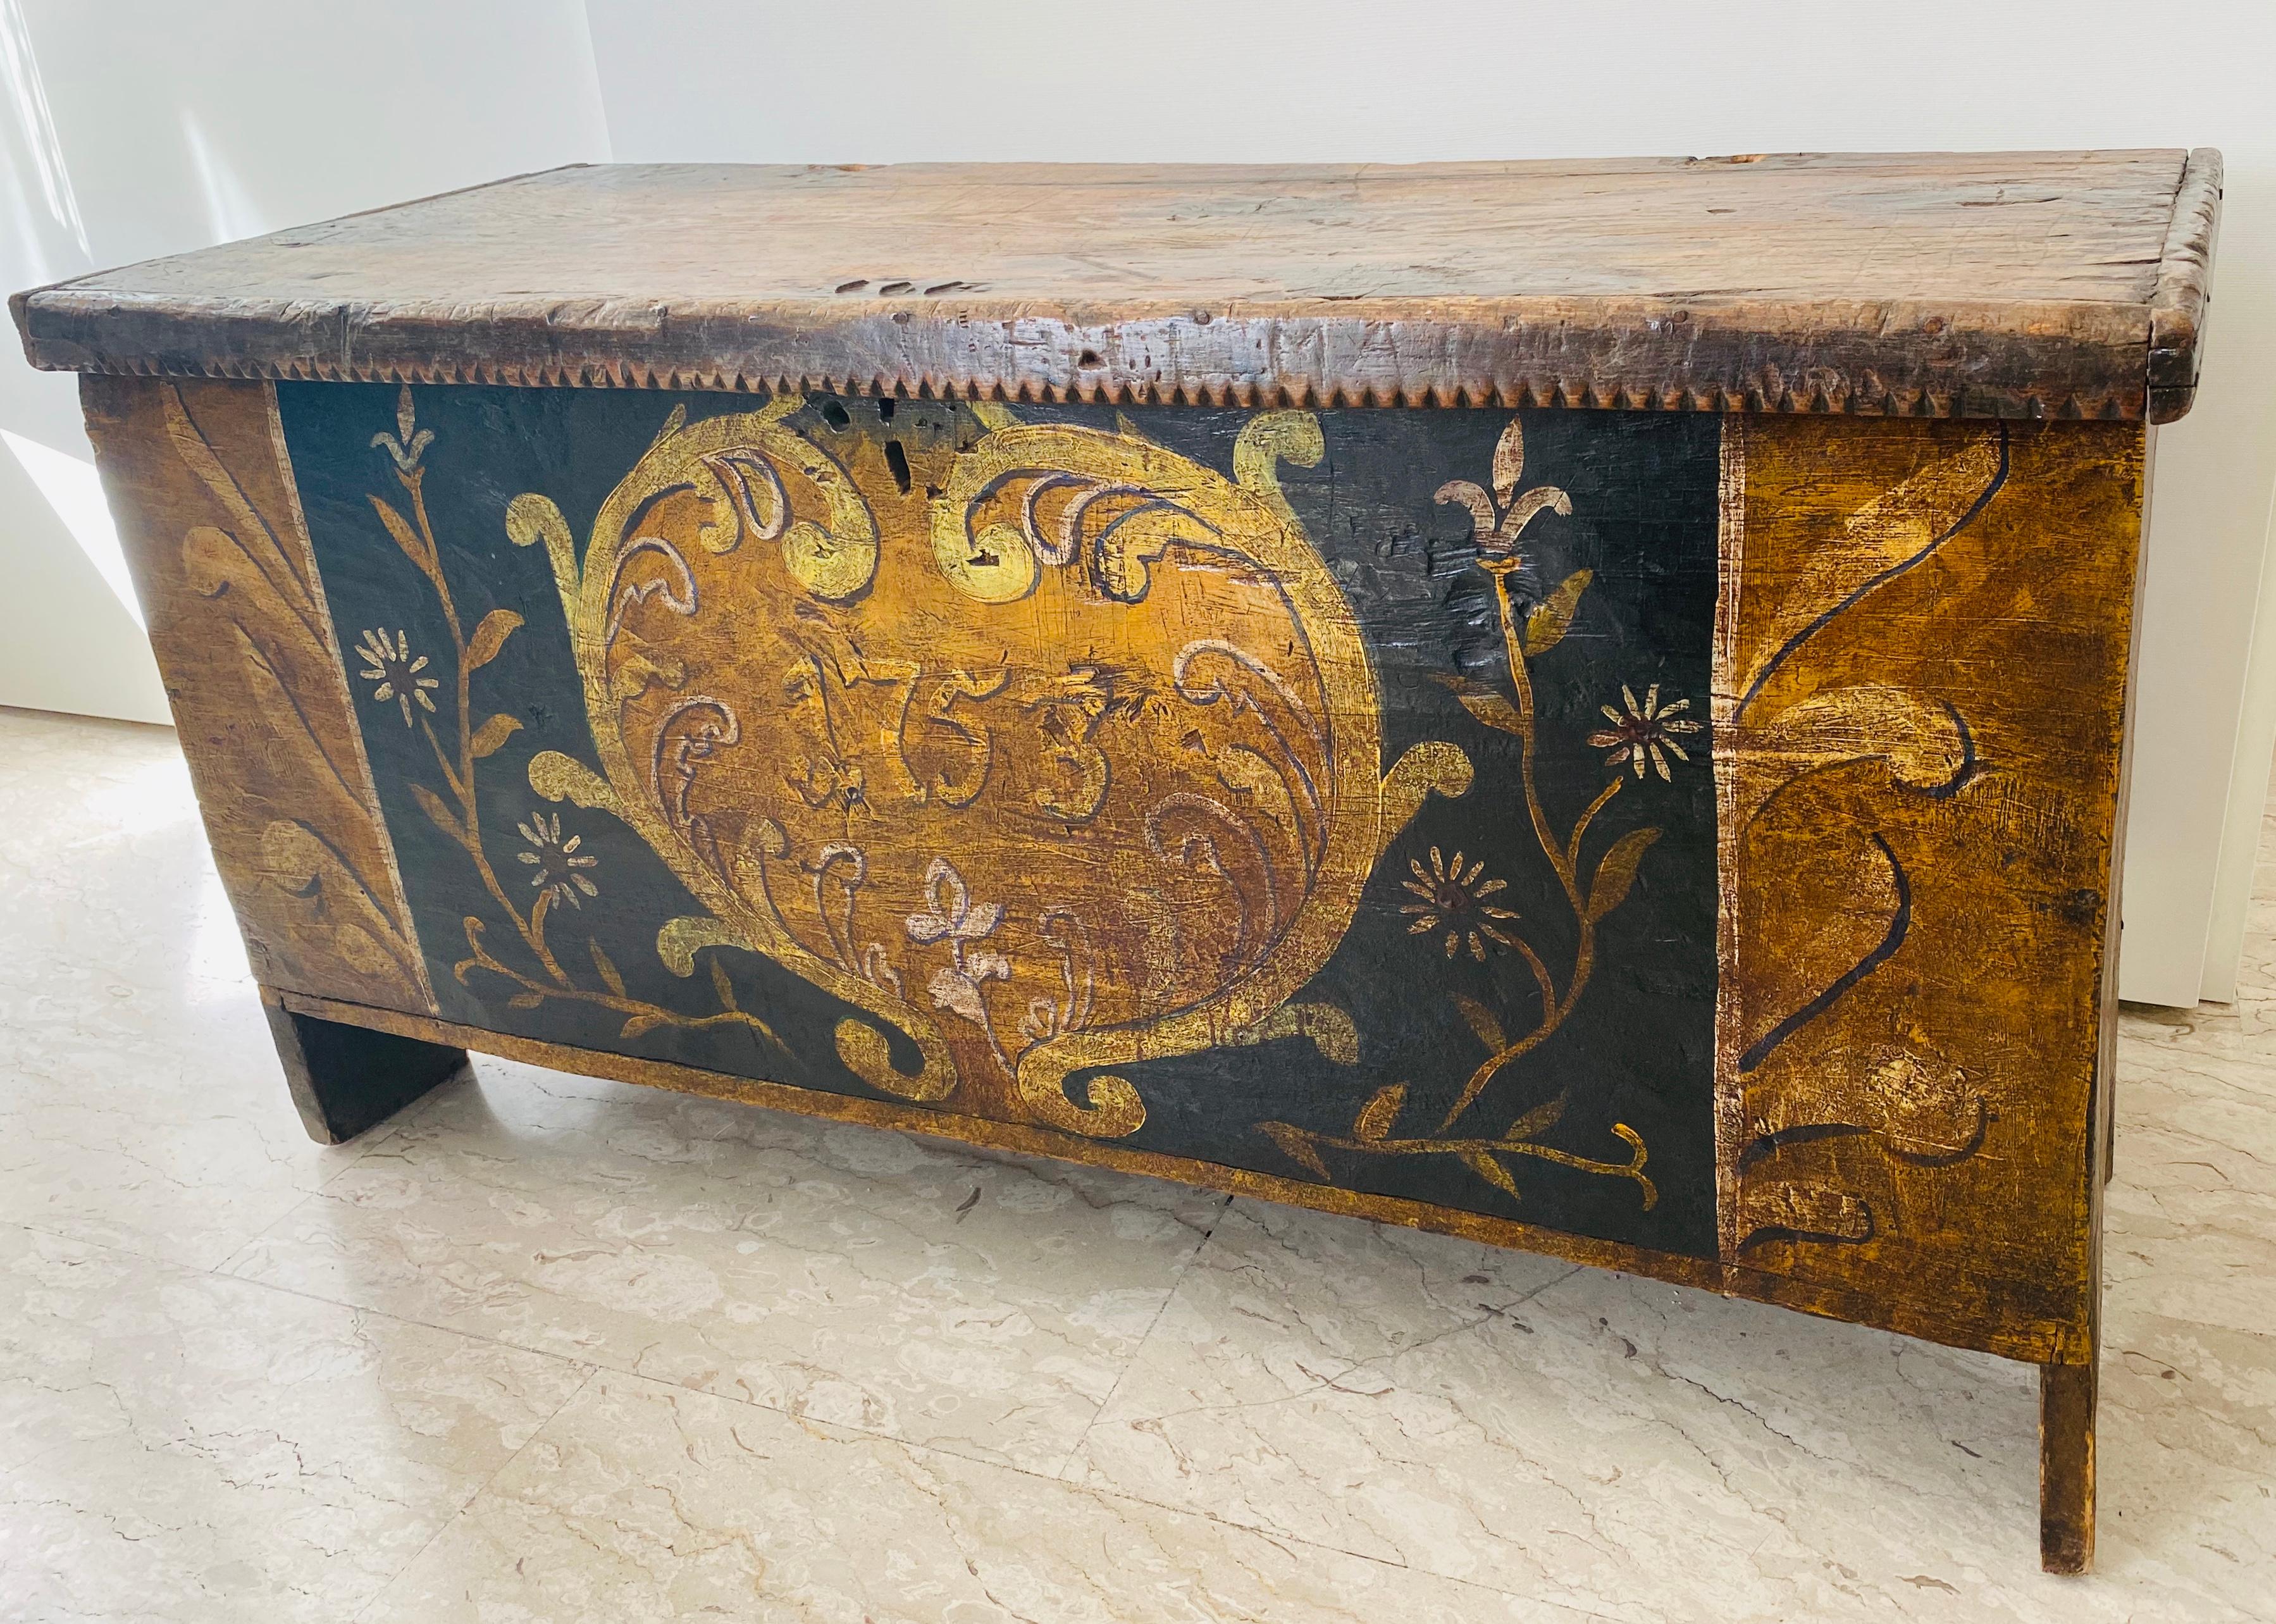 Wedding chest, coming from a Florentine family, with a renaissance villa in Frascati, Italy. Totally handmade and composed of single pieces of wood, cut with a hatchet. Finely decorated. Museum piece.